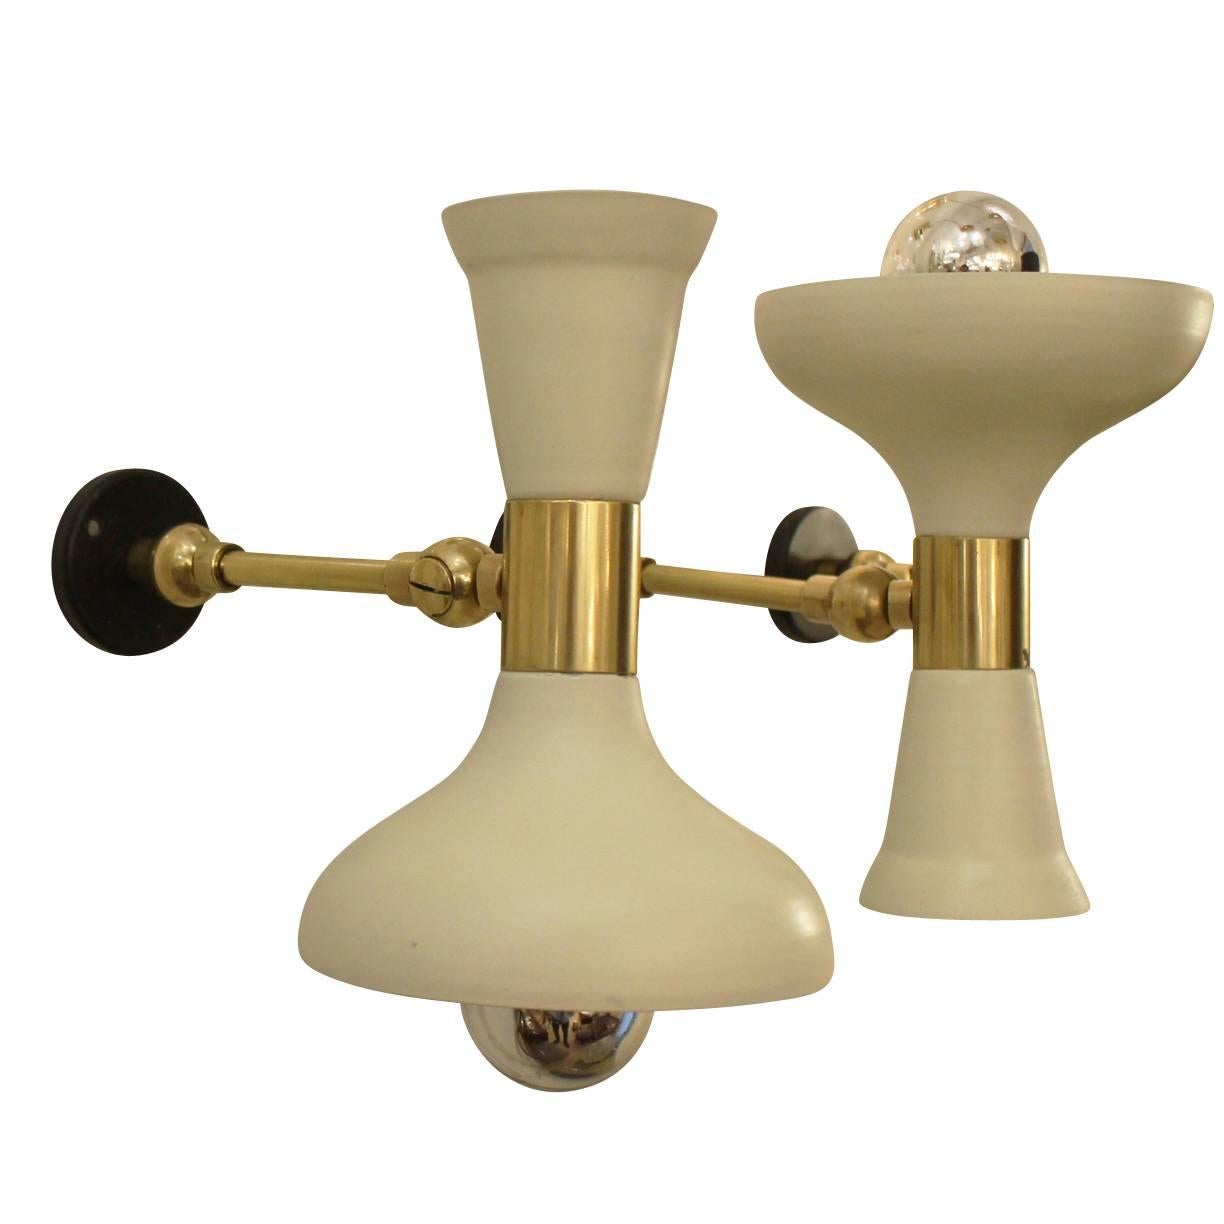 Elegant pair of sconces with white shades. The inside of the shades is painted white while the adjustable arms are brass. Each holds one candelabra socket. A second pair with dark green shades is also available and the color can be changed upon